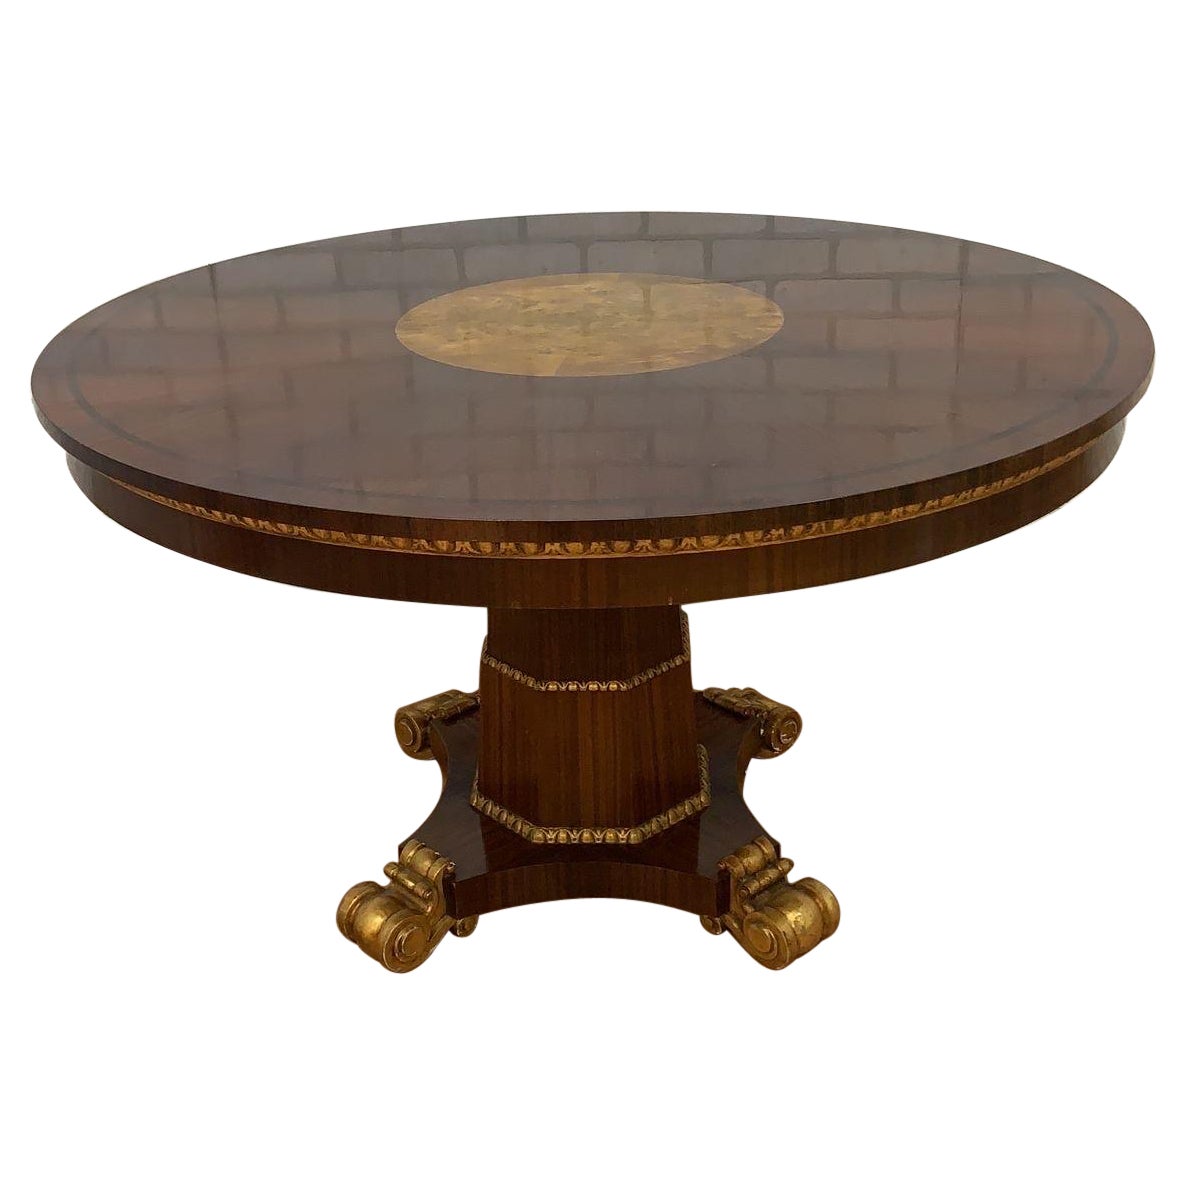 Antique French Empire Style Round Pedestal Table For Sale